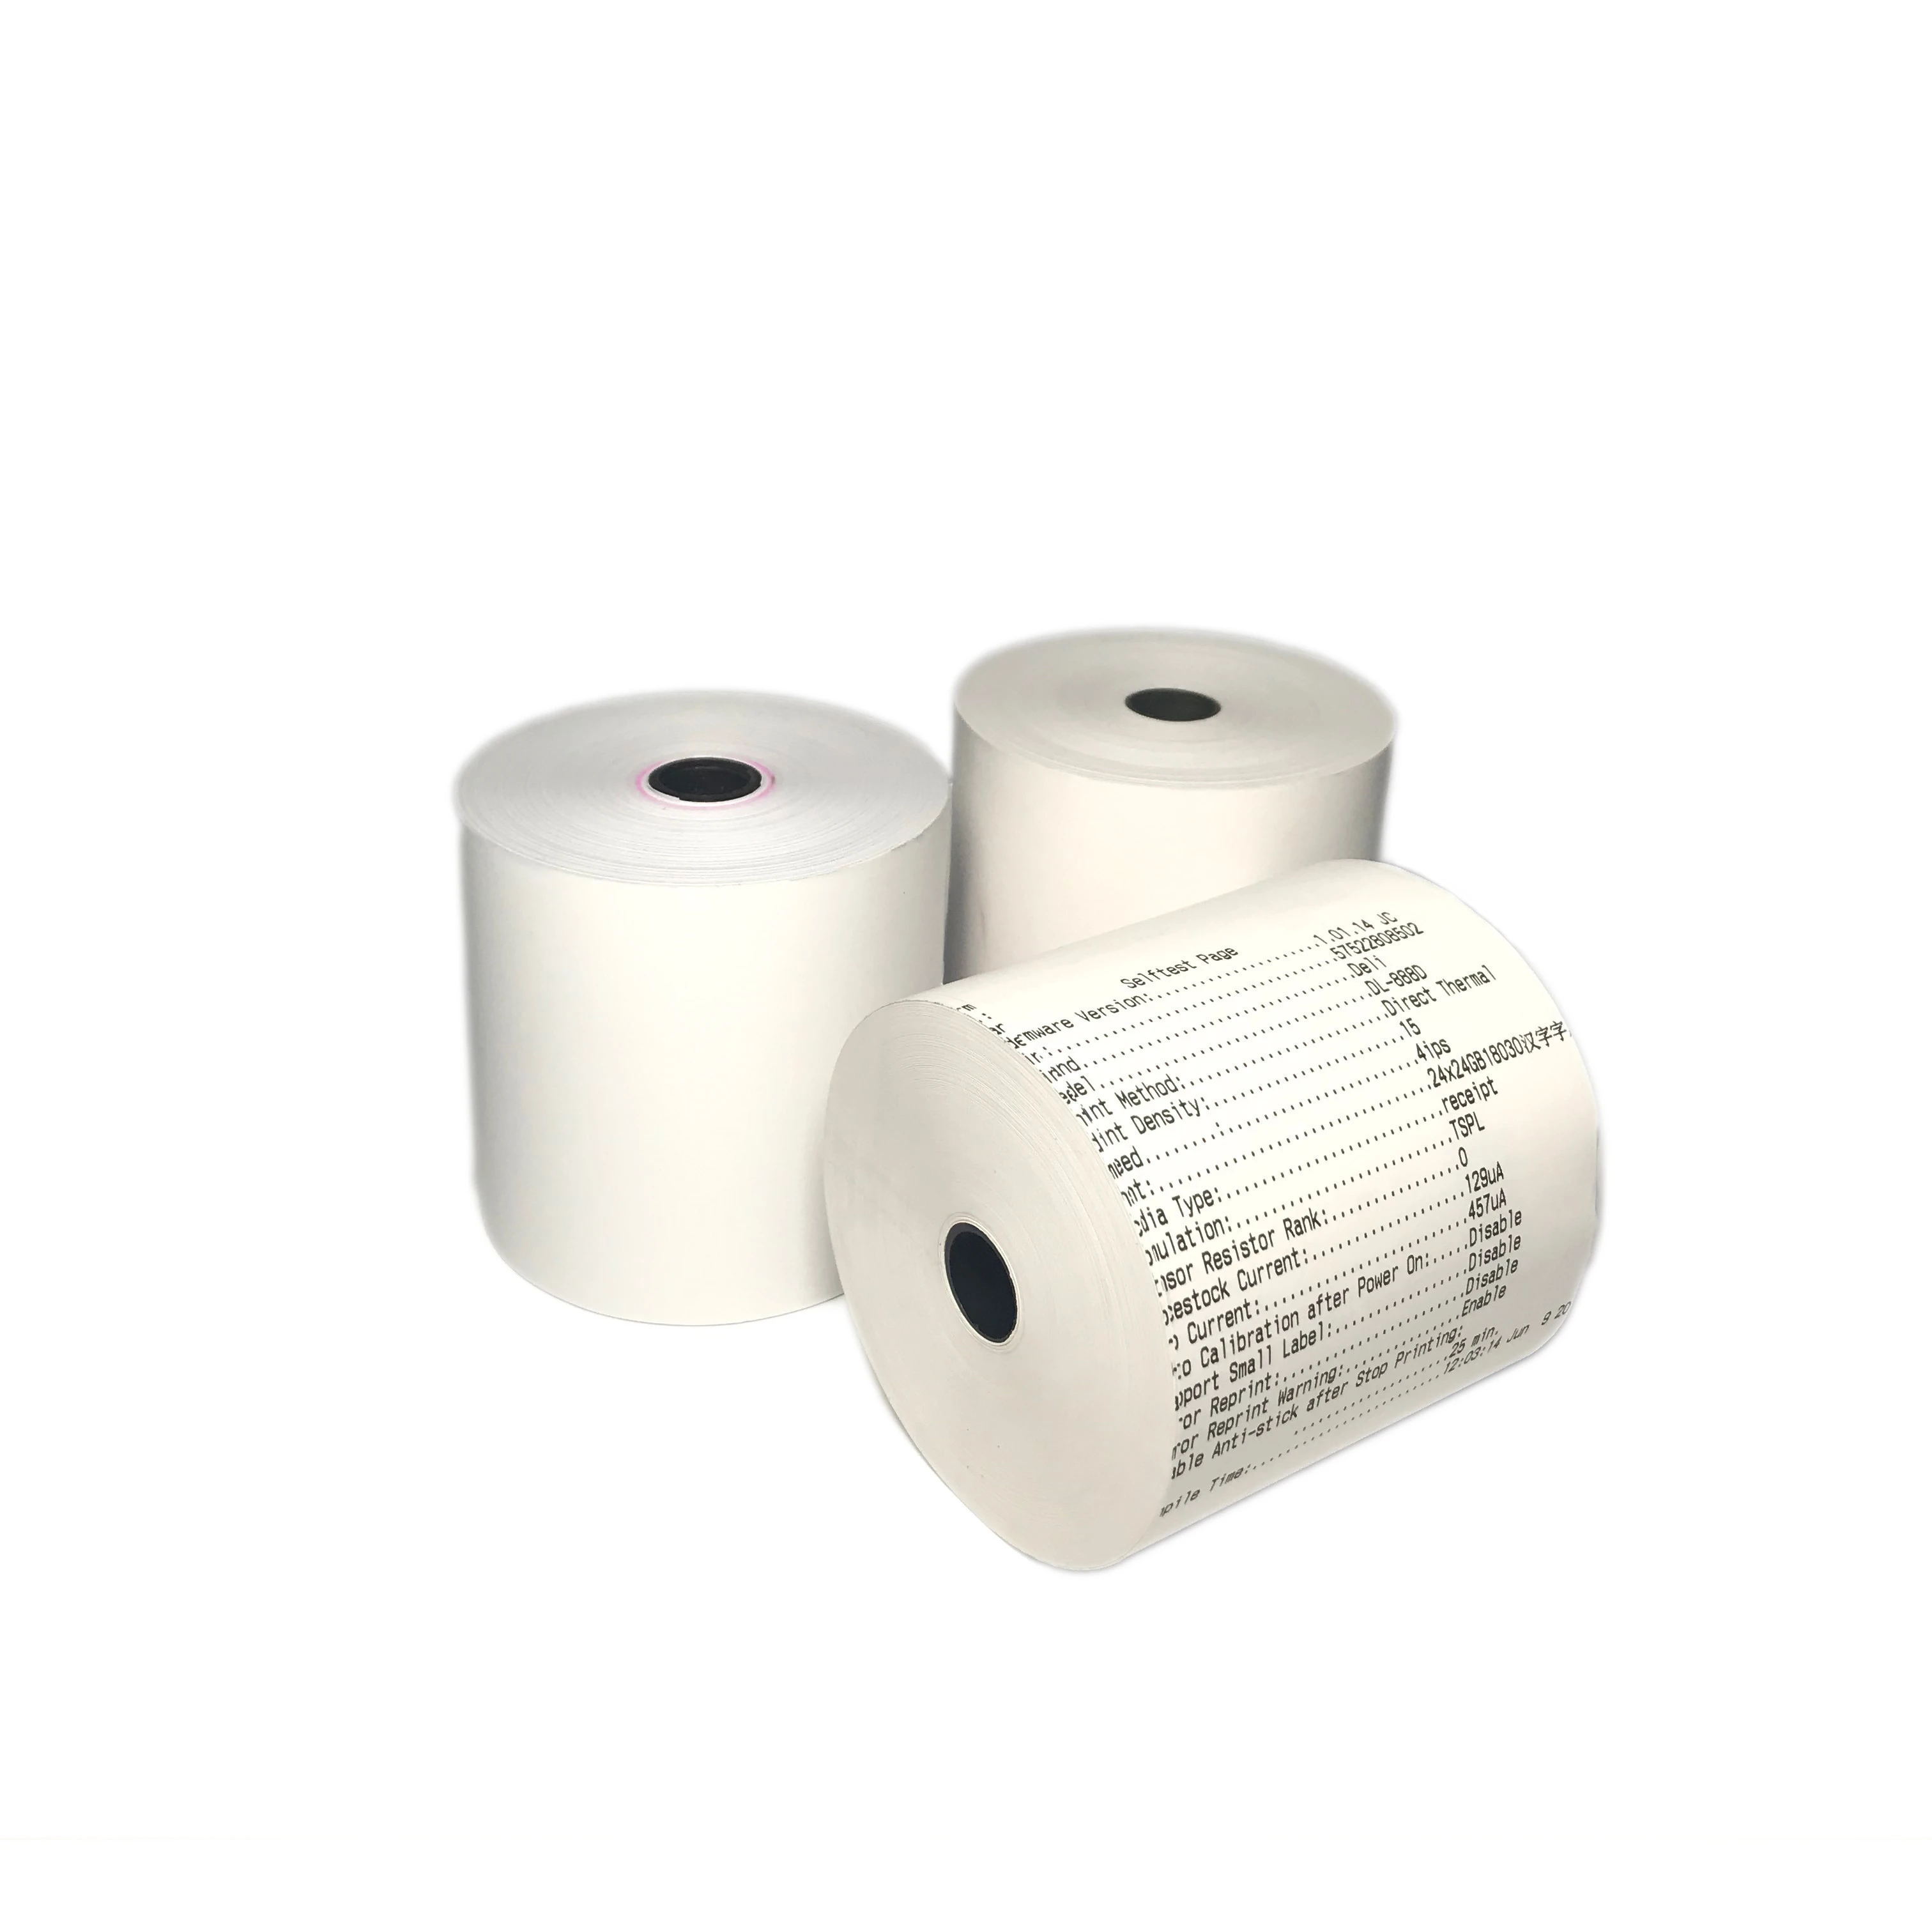 57mm*40mm thermal transfer paper